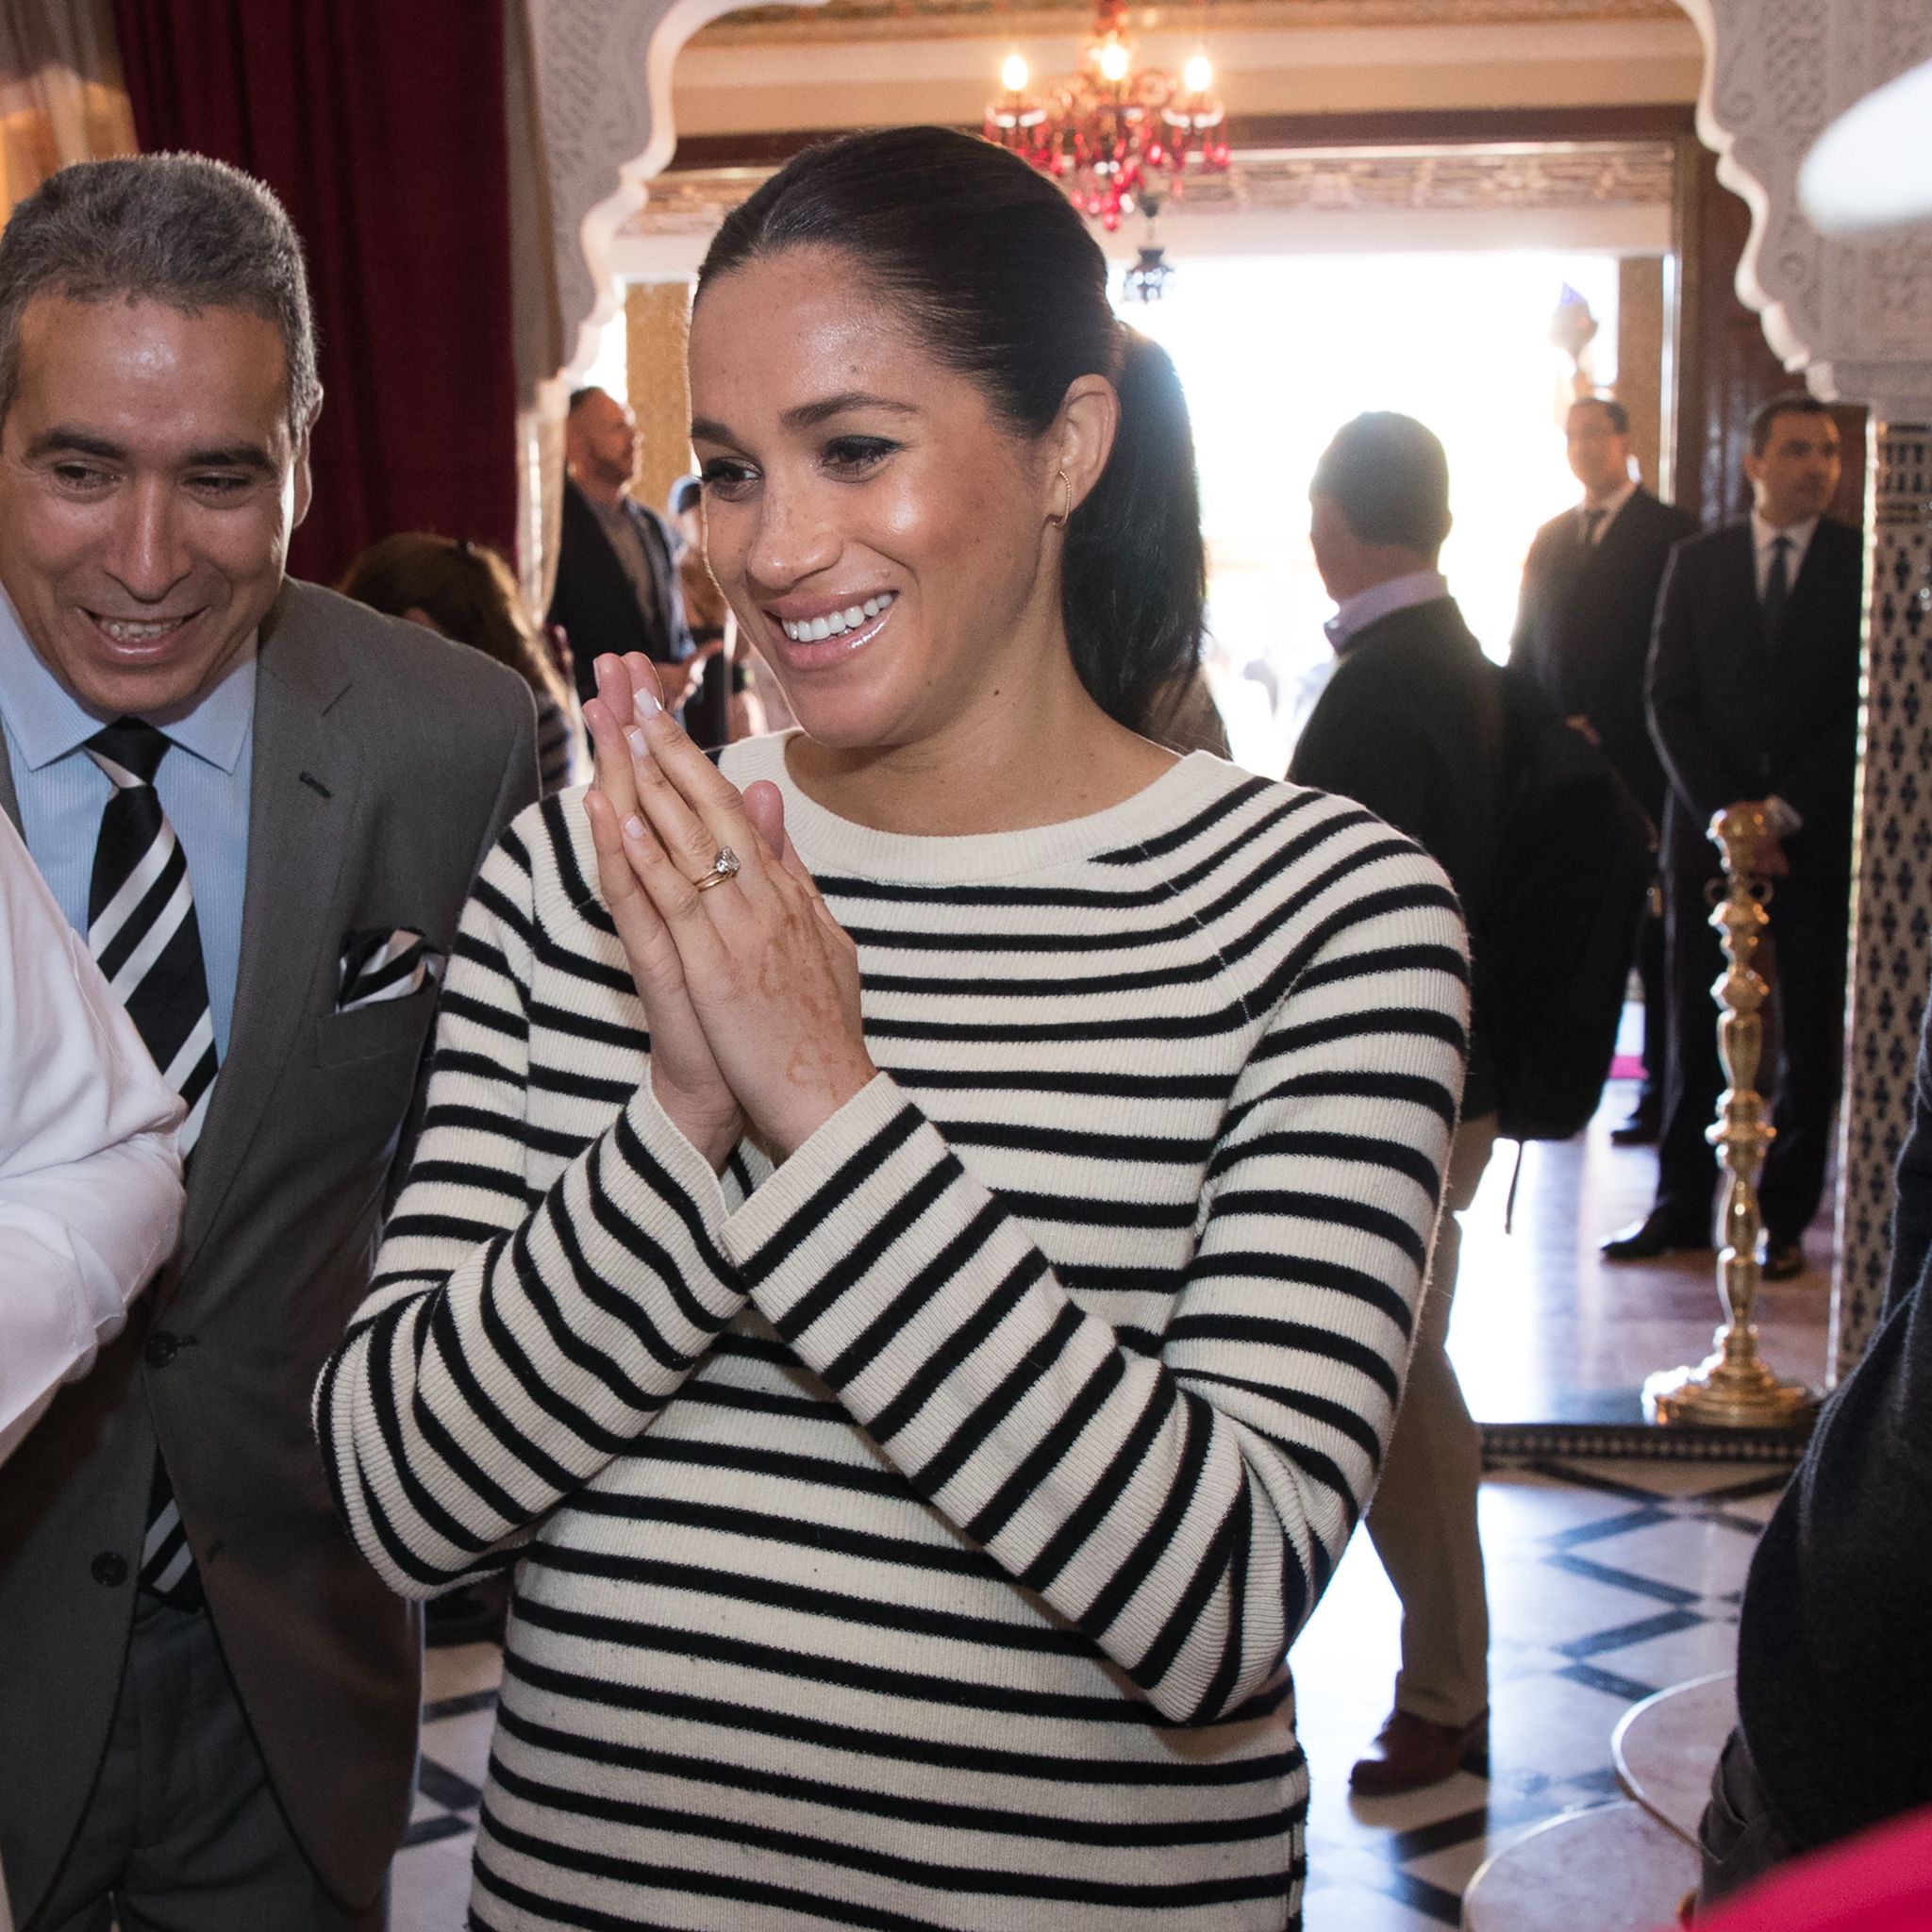 This is the date Meghan Markle is most likely to give birth